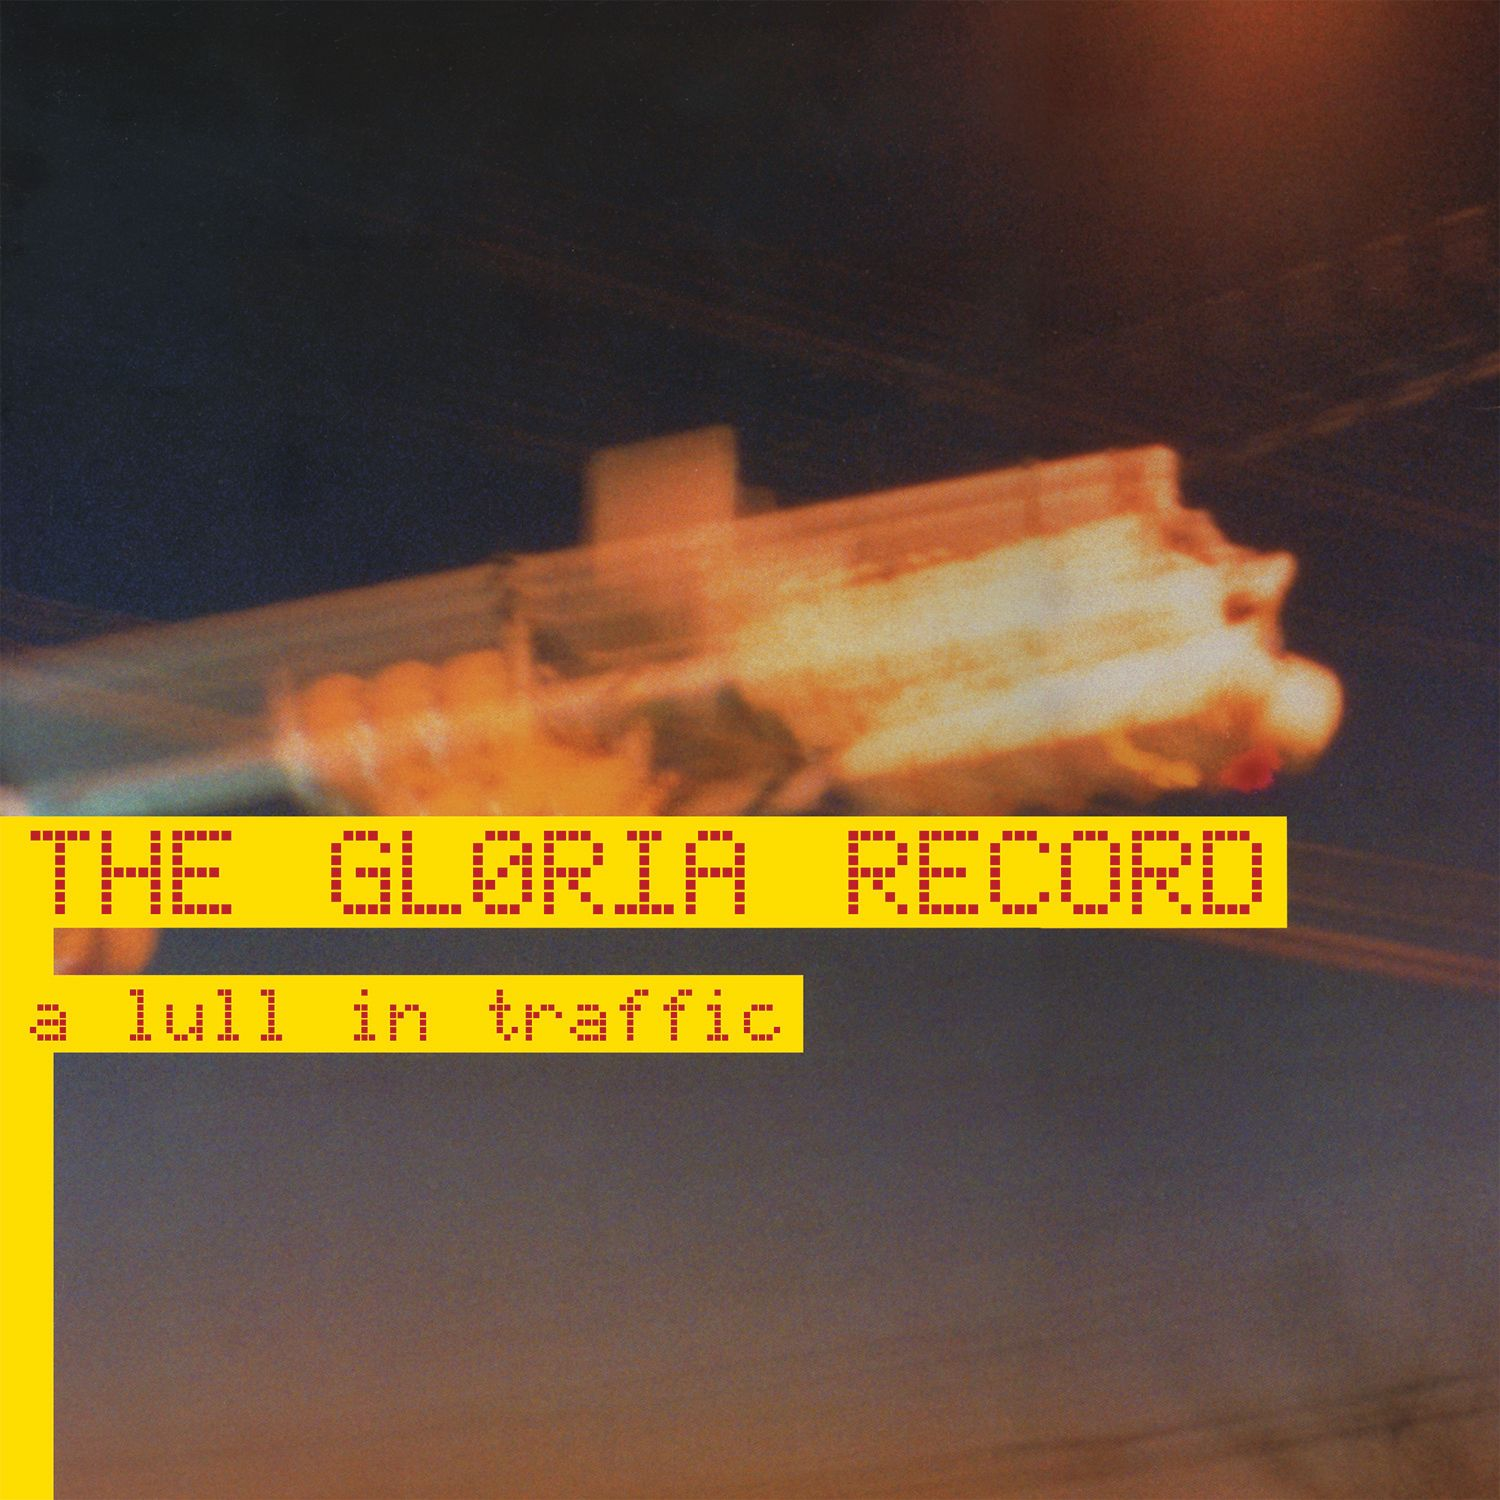 The Gloria Record - A Lull in Traffic